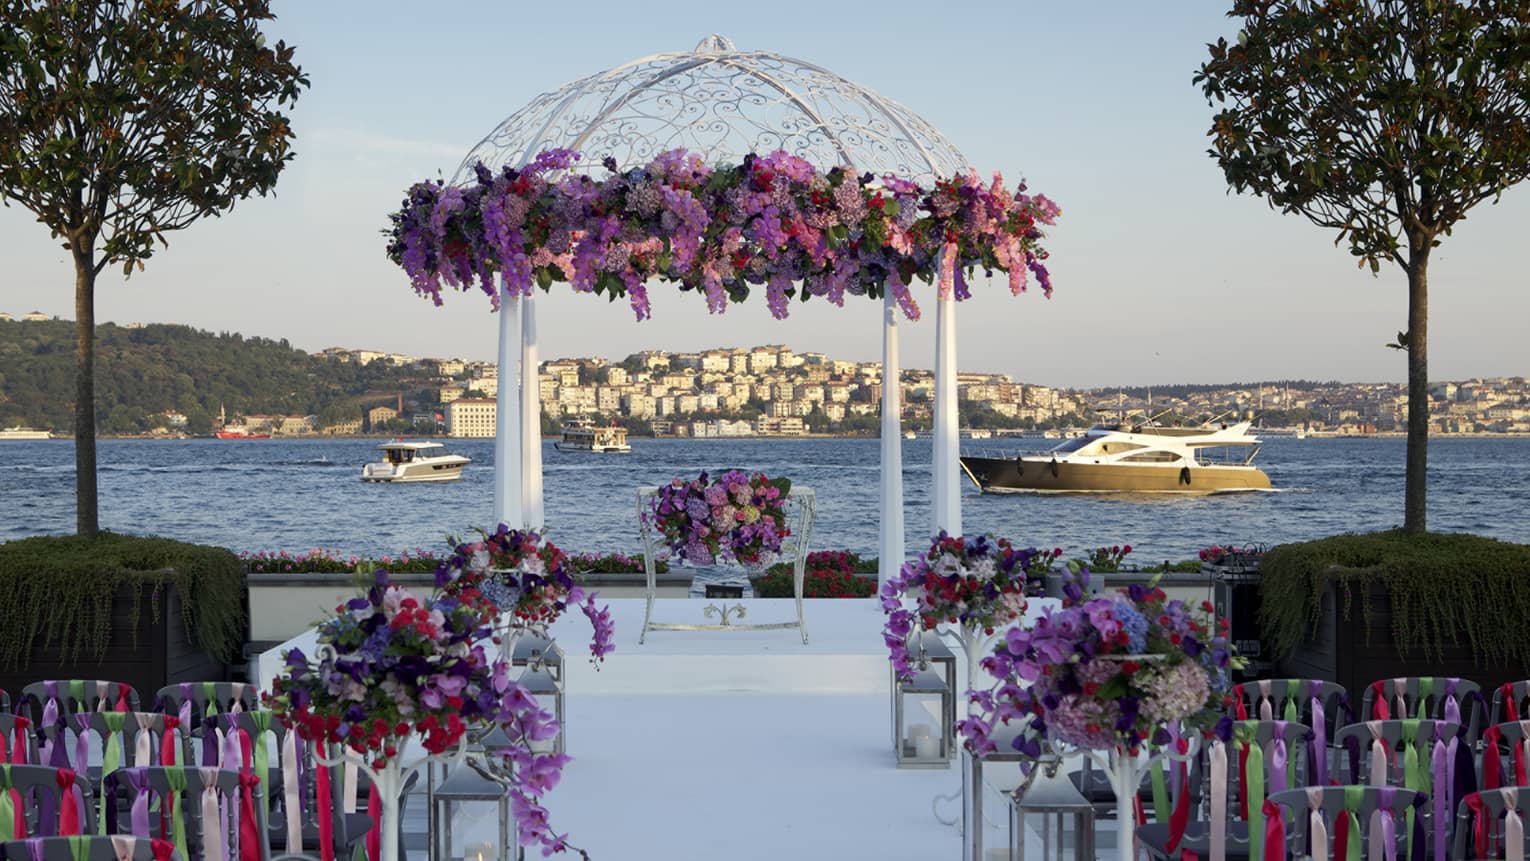 Wedding ceremony set up, rows of chairs face altar with pink and purple flowers in front of sea